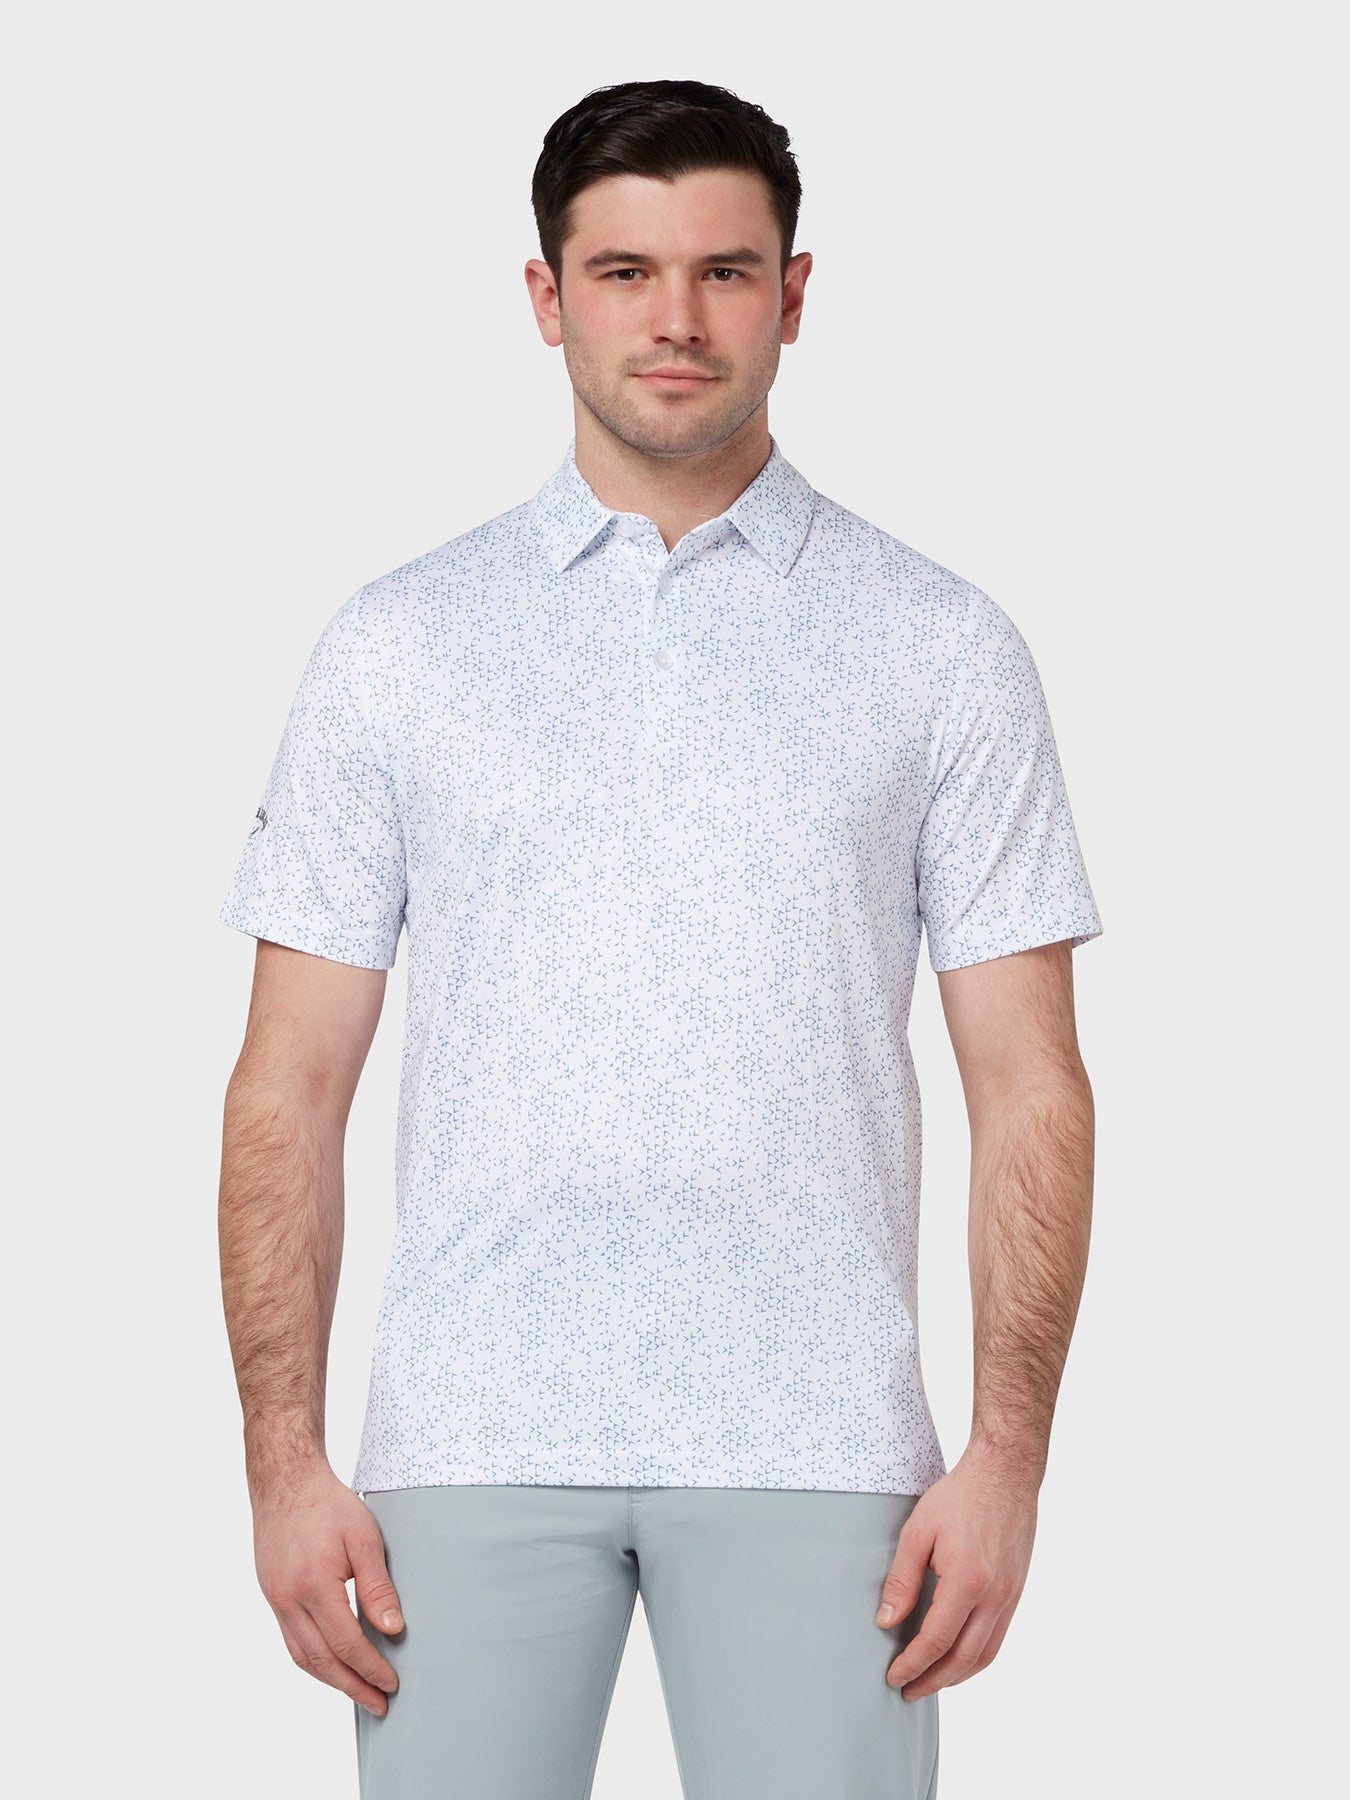 View All Over Chev Printed Polo In Bright White Bright White M information